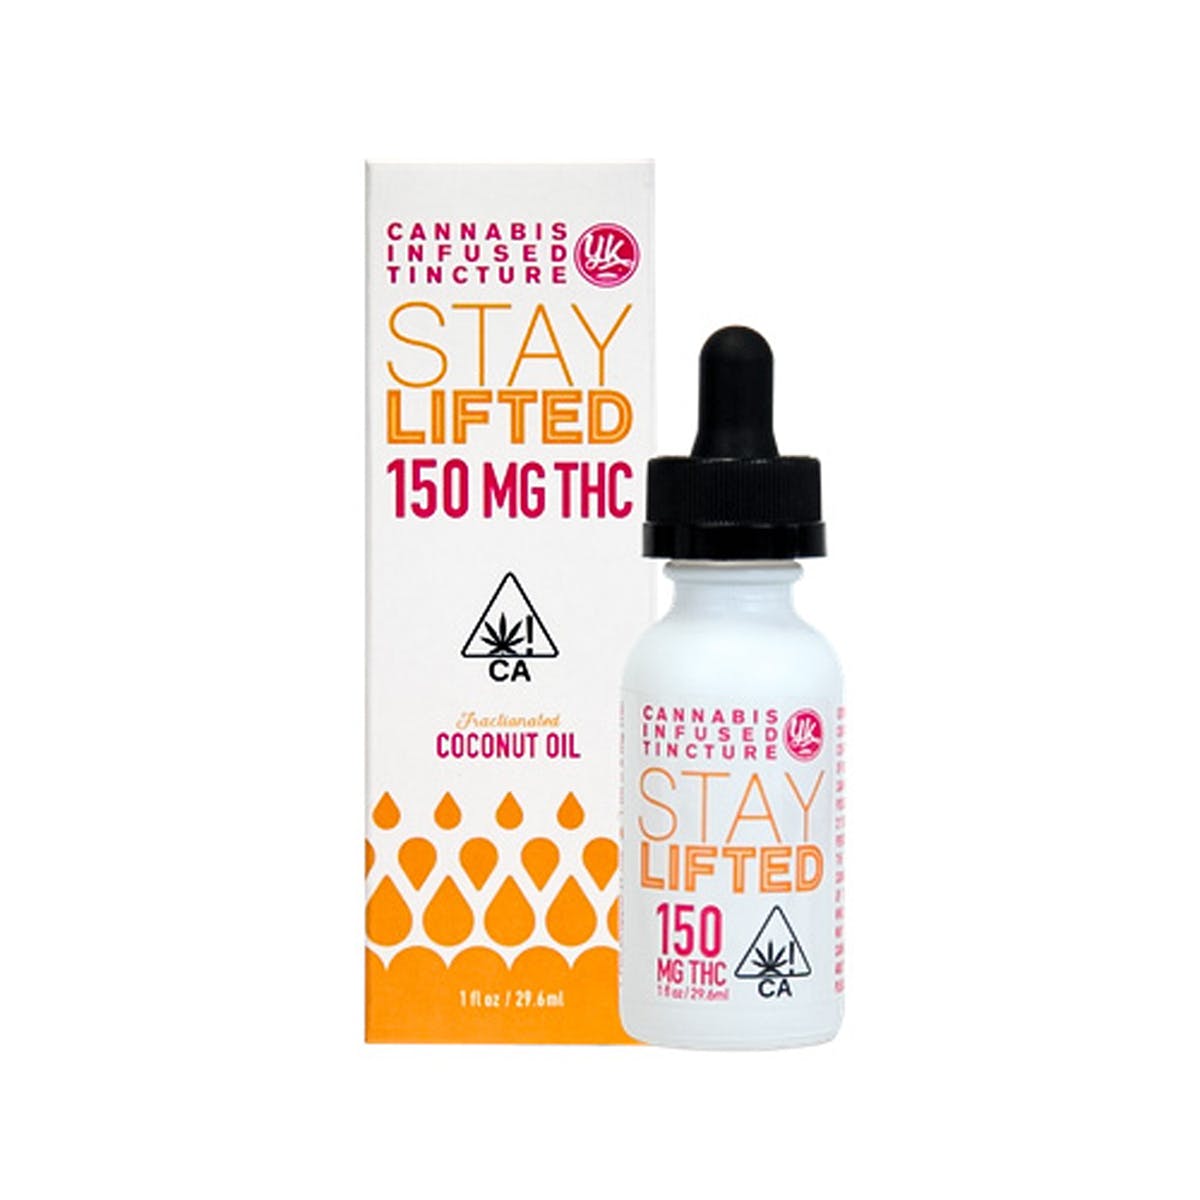 Stay Lifted, 150mg THC